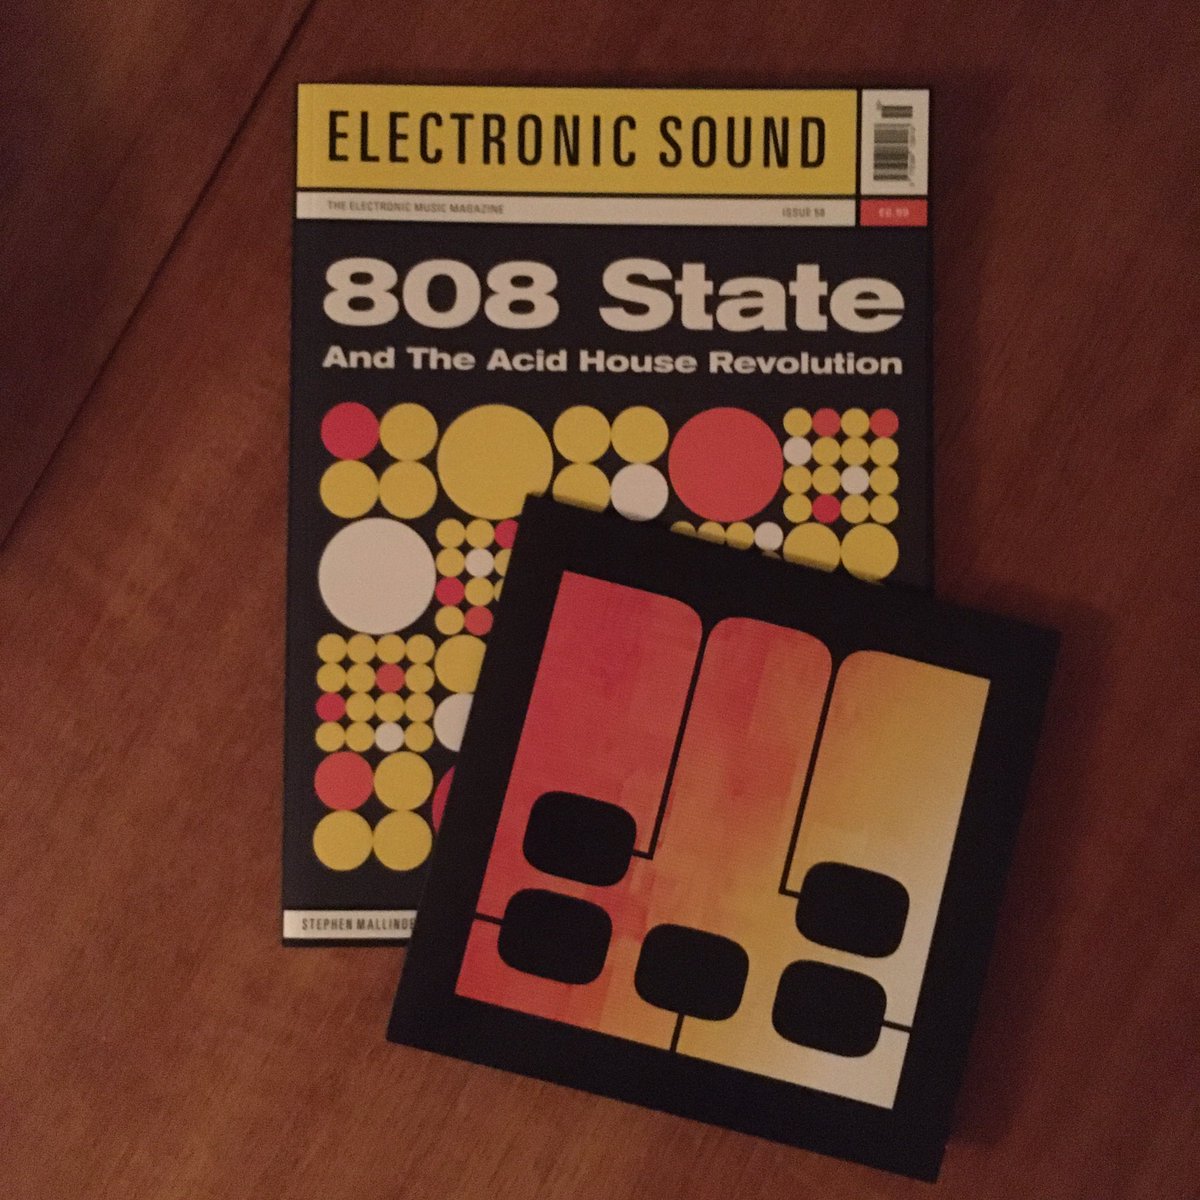 Got home from a night out and this was waiting for me when I got in! Yay! #electronicsound